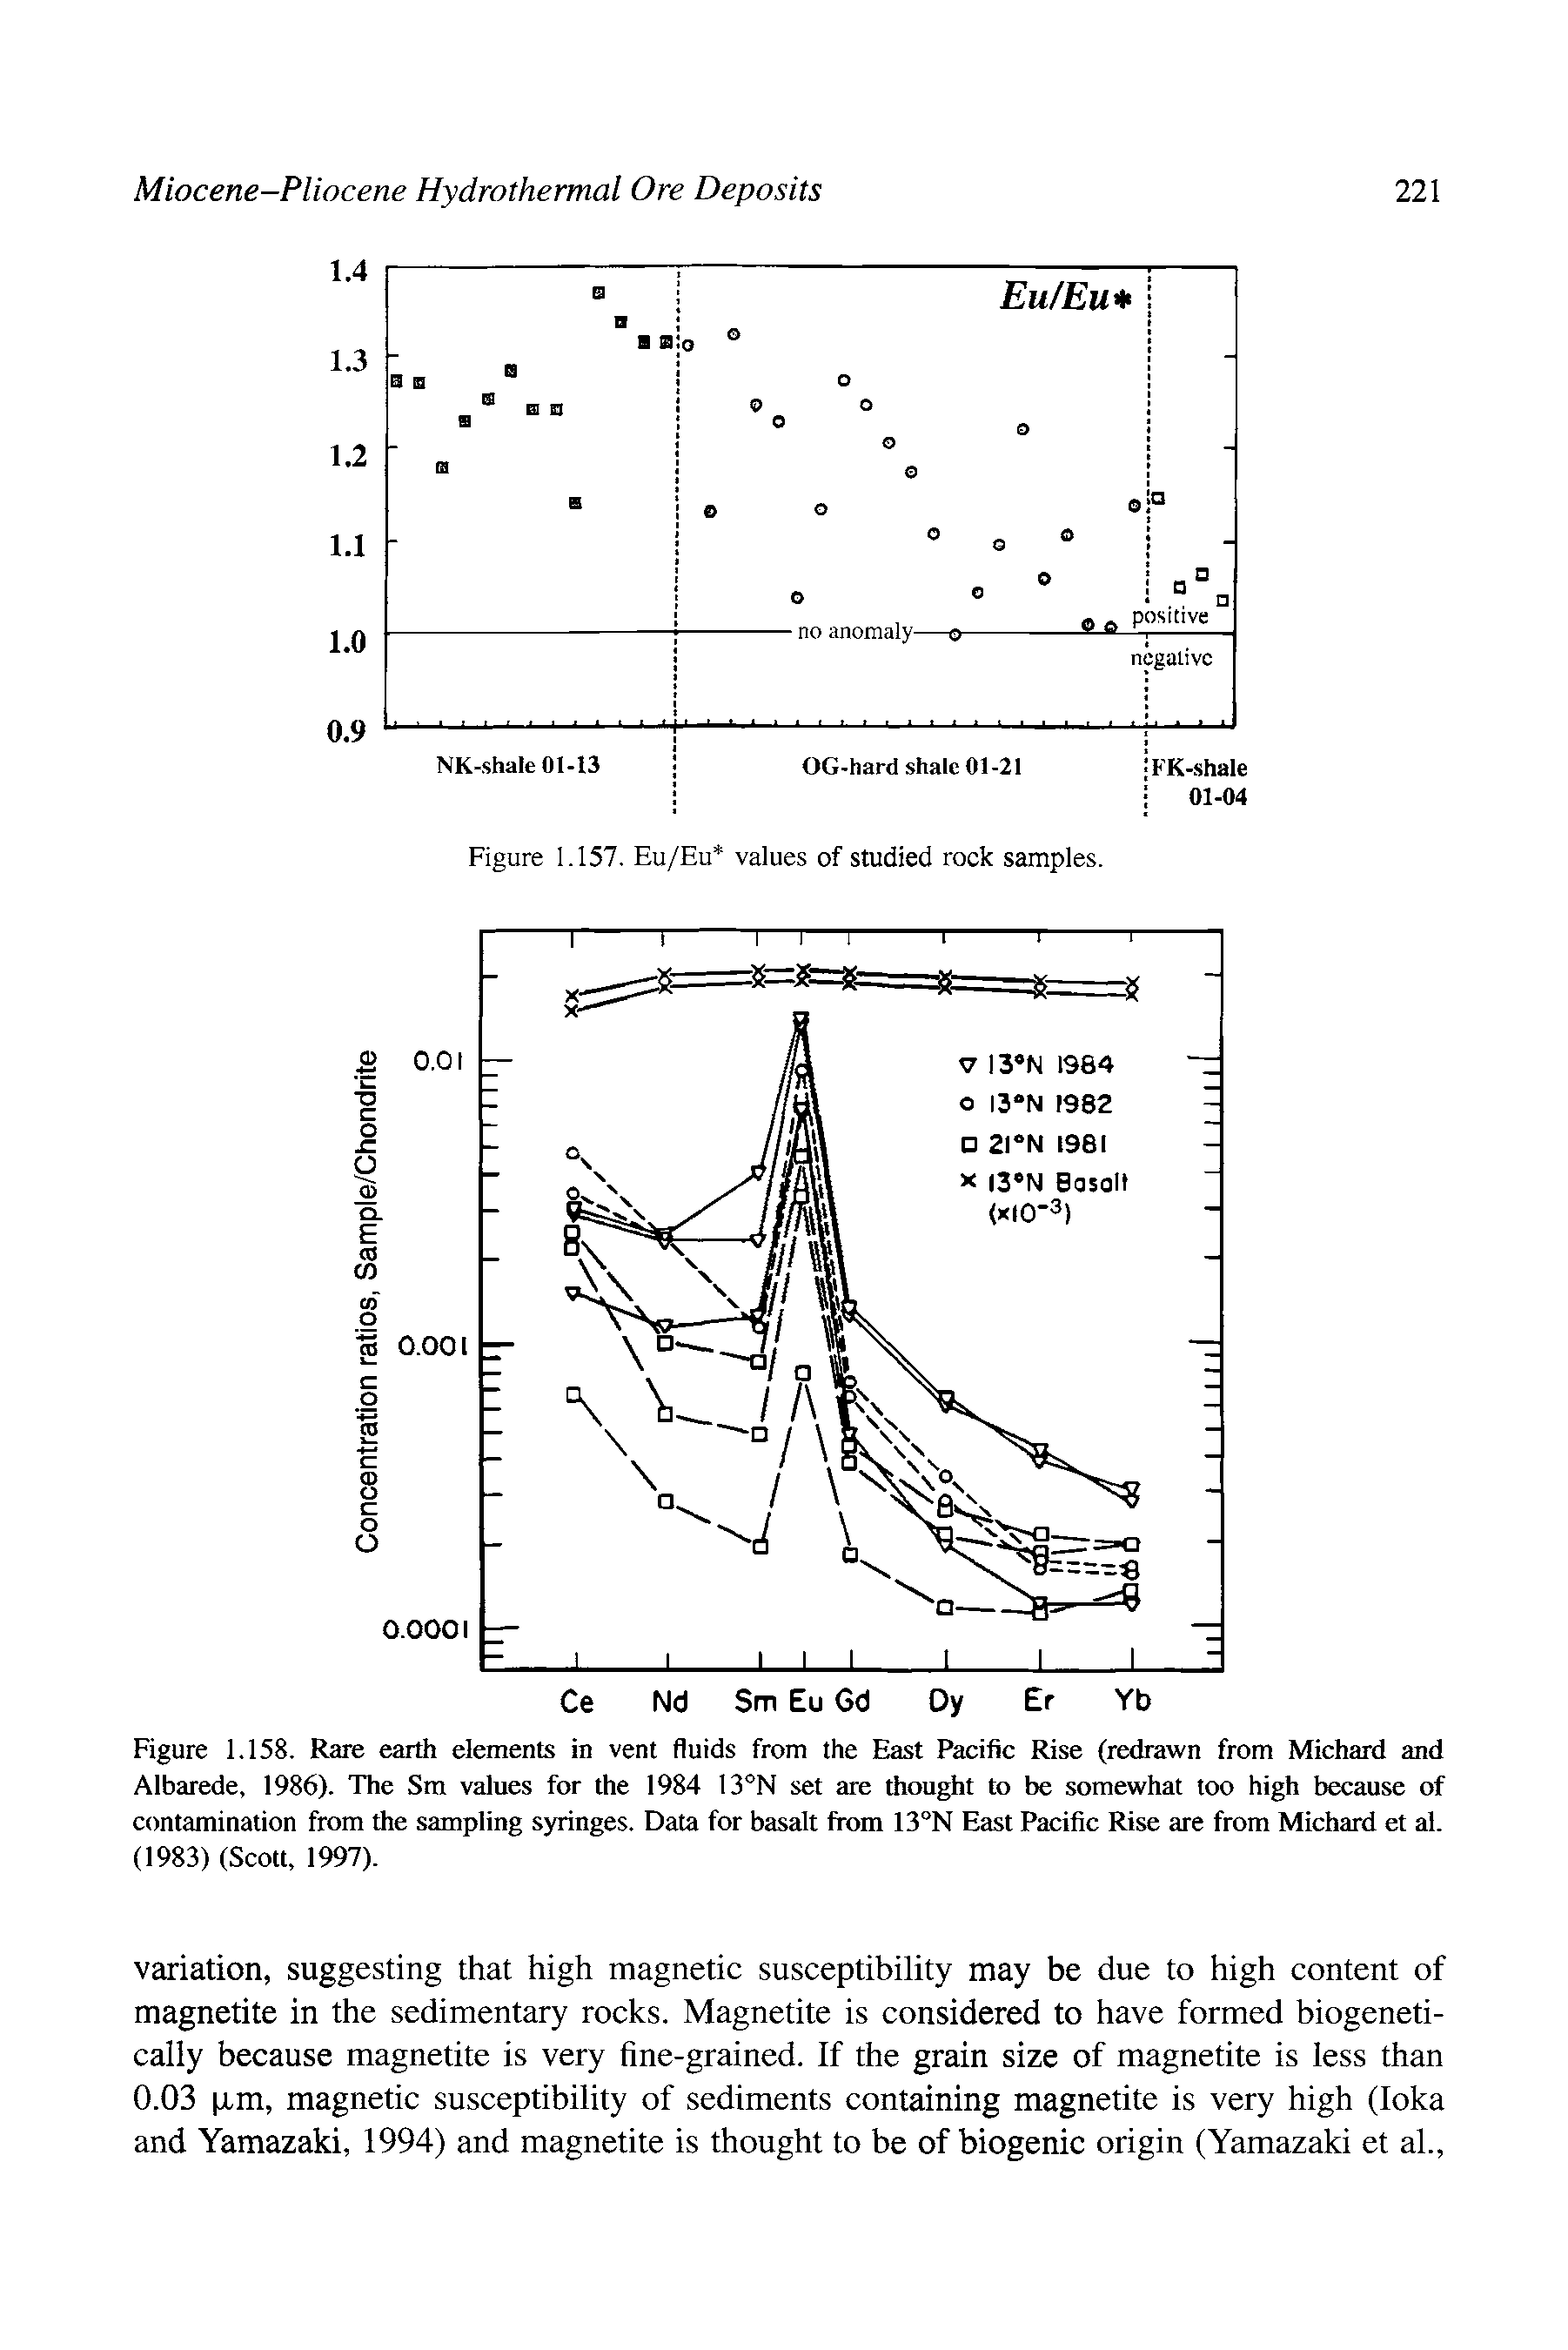 Figure 1.158. Rare earth elements in vent fluids from the East Pacific Rise (redrawn from Michard and Albarede, 1986). The Sm values for the 1984 13 N set are thought to be somewhat too high because of contamination from the sampling syringes. Data for basalt from 13°N East Pacific Rise are from Michard et al. (1983) (Scott, 1997).